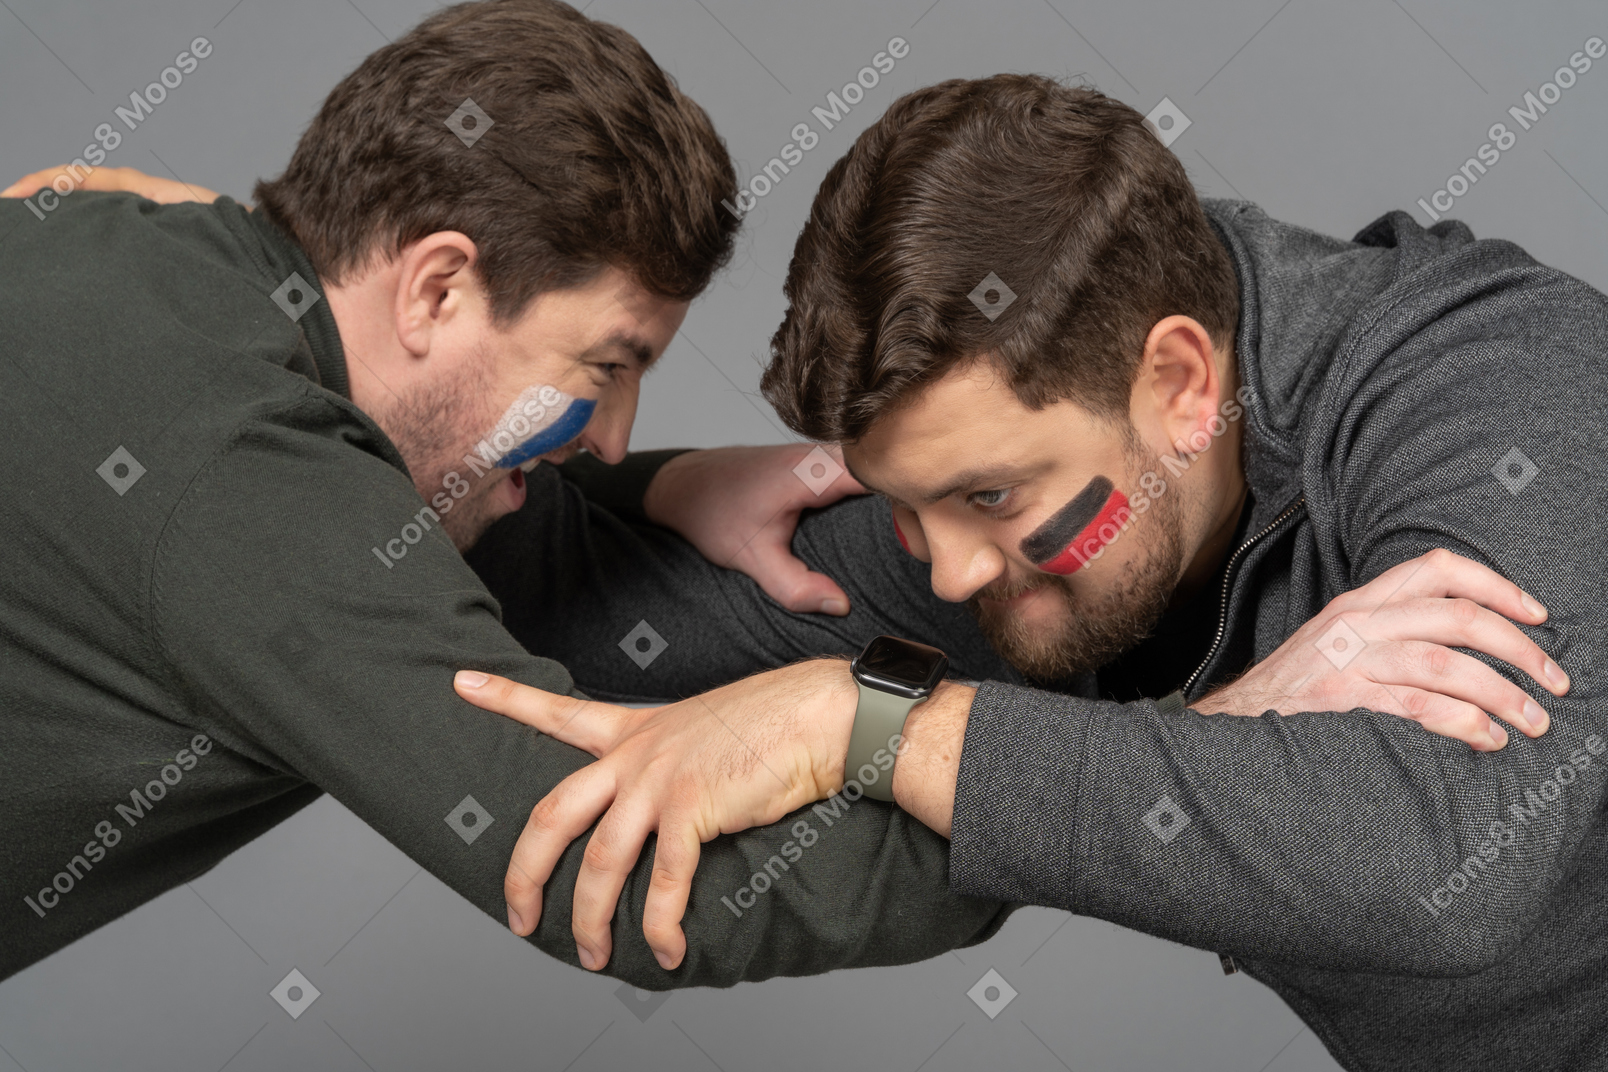 Side view of two fighting male football fans